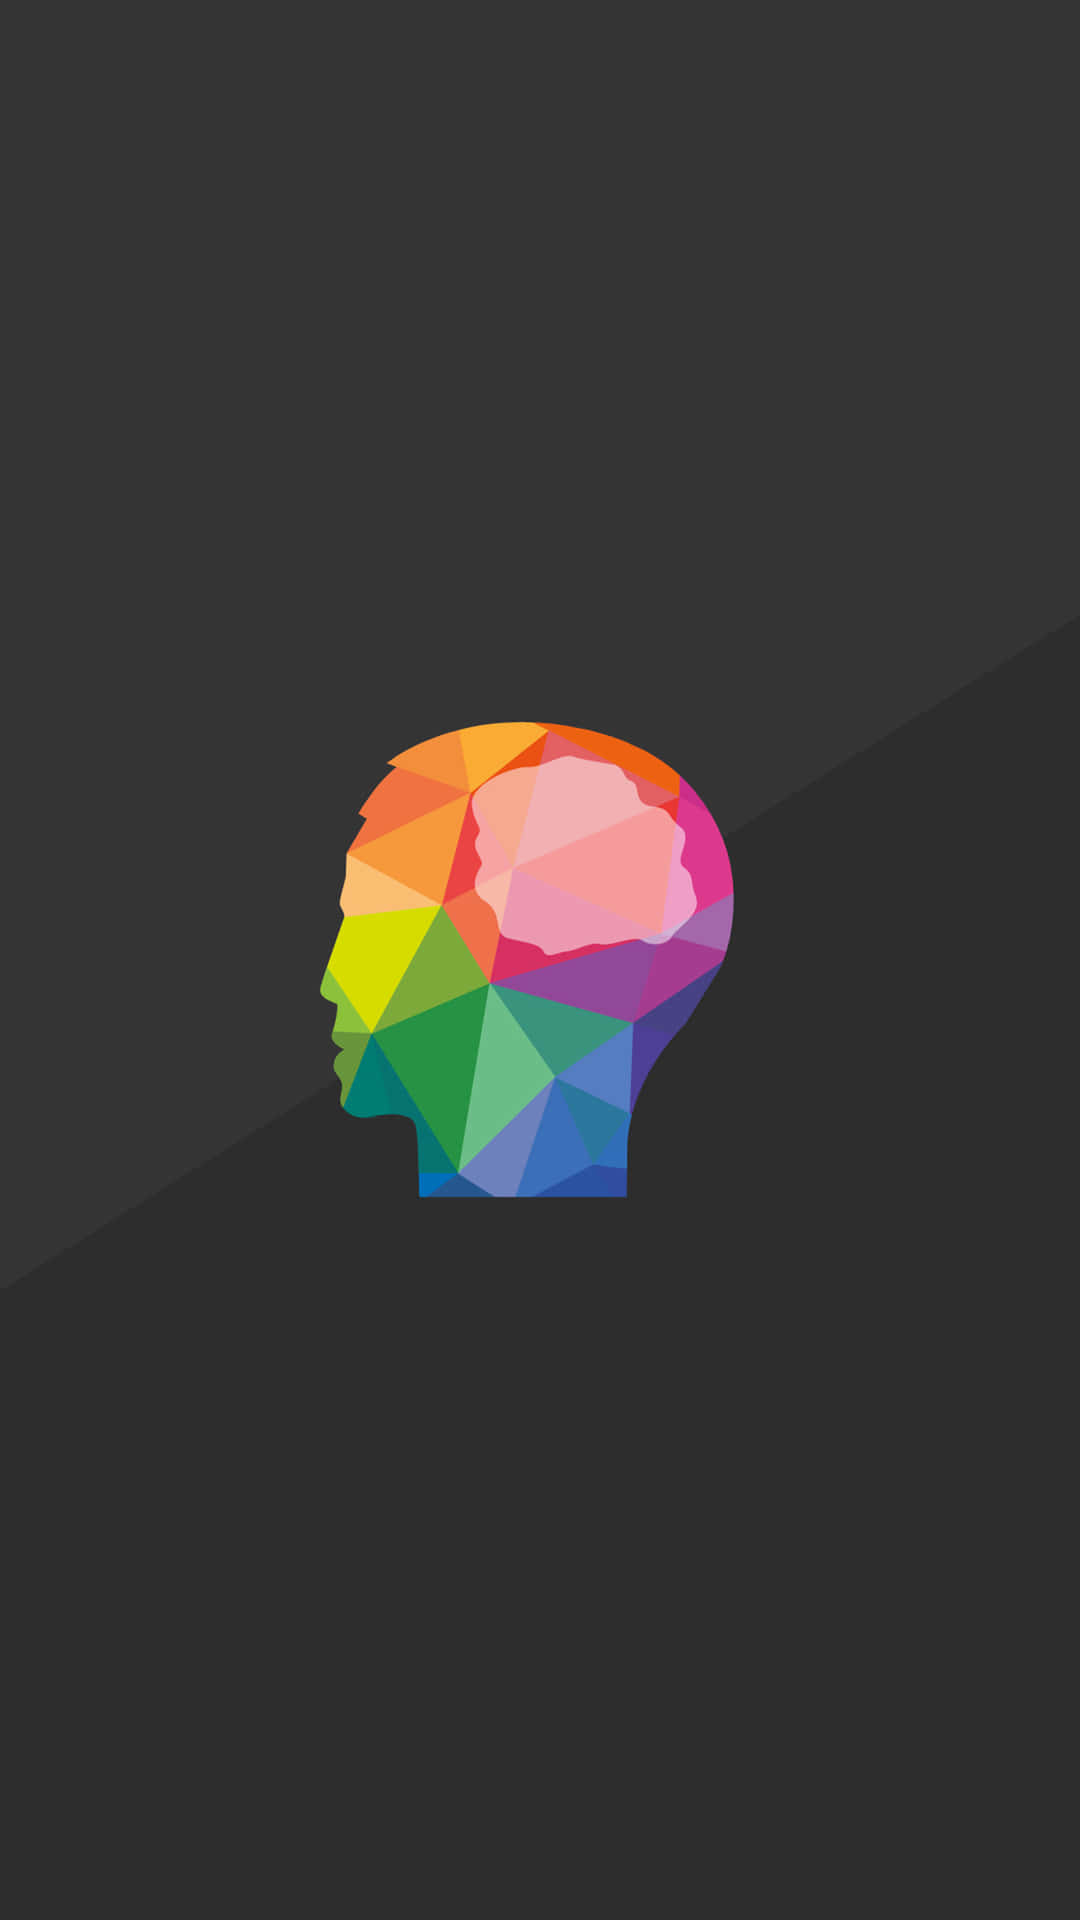 A Colorful Logo Of A Human Head